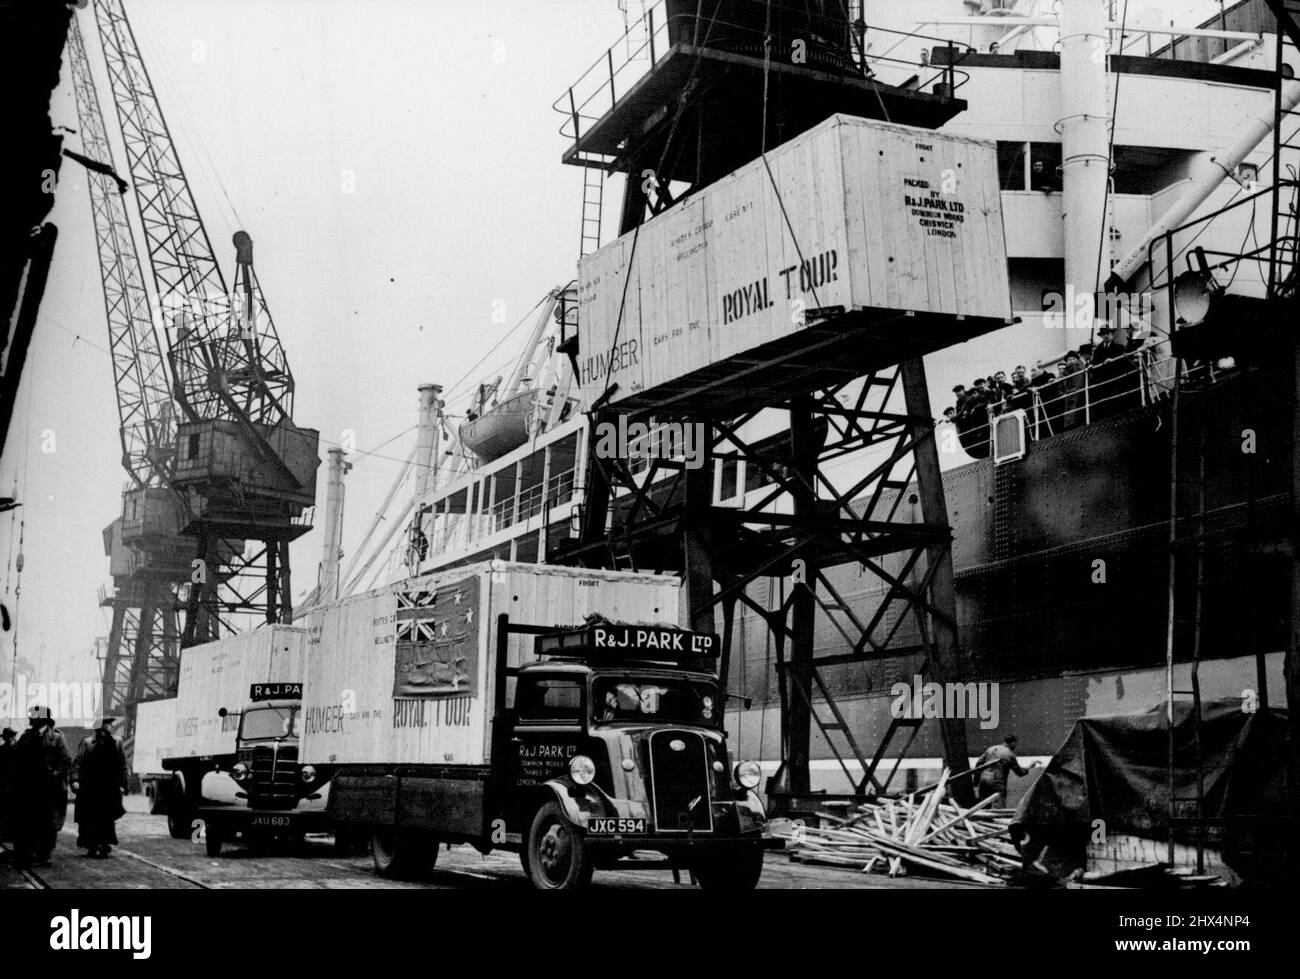 The Royal Tour: Royal Cars Leave for New Zealand. Humber cars part of the fleet to be used during the Royal tour of Australia and New Zealand, being loaded in readiness for departure at the Royal Albert Dock, London. November 18, 1948. (Photo by Sport & General Press Agency, Limited). Stock Photo